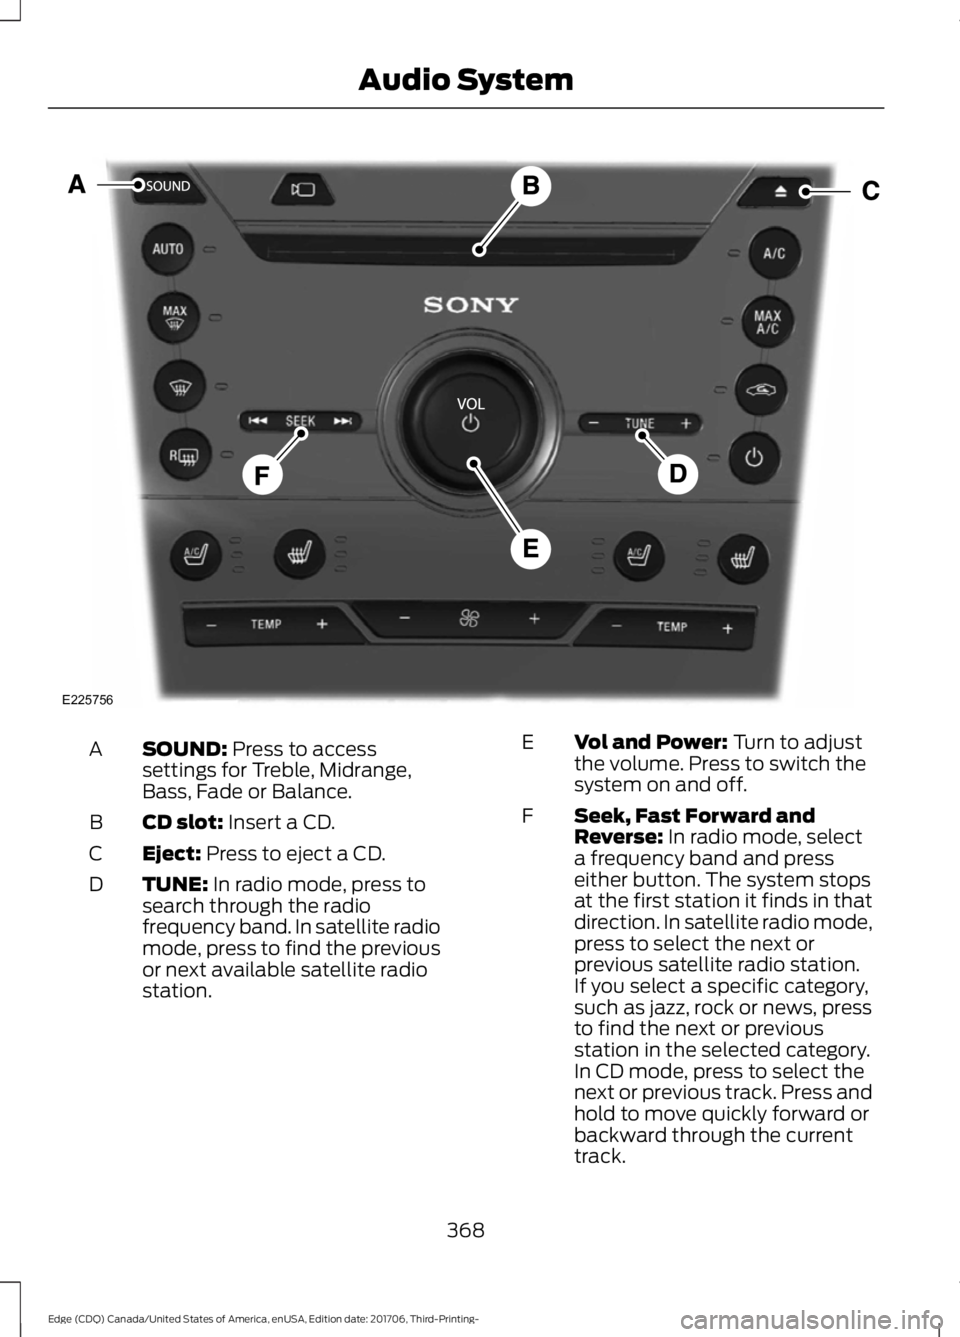 FORD EDGE 2018 Owners Manual SOUND: Press to access
settings for Treble, Midrange,
Bass, Fade or Balance.
A
CD slot:
 Insert a CD.
B
Eject:
 Press to eject a CD.
C
TUNE:
 In radio mode, press to
search through the radio
frequency